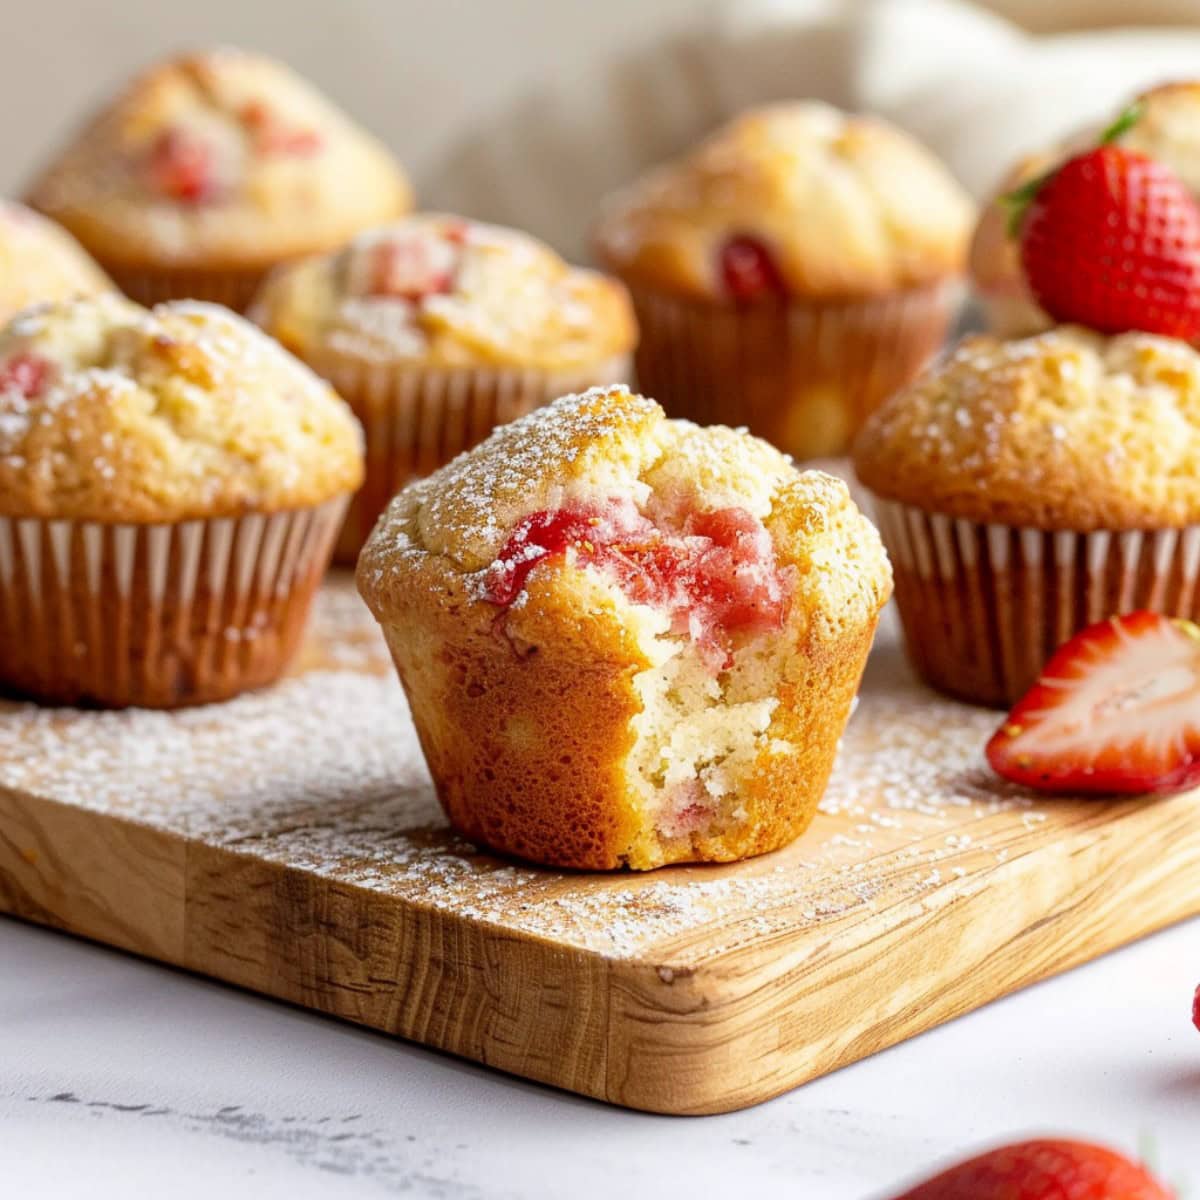 Strawberry muffins slightly taken out to show its inner texture